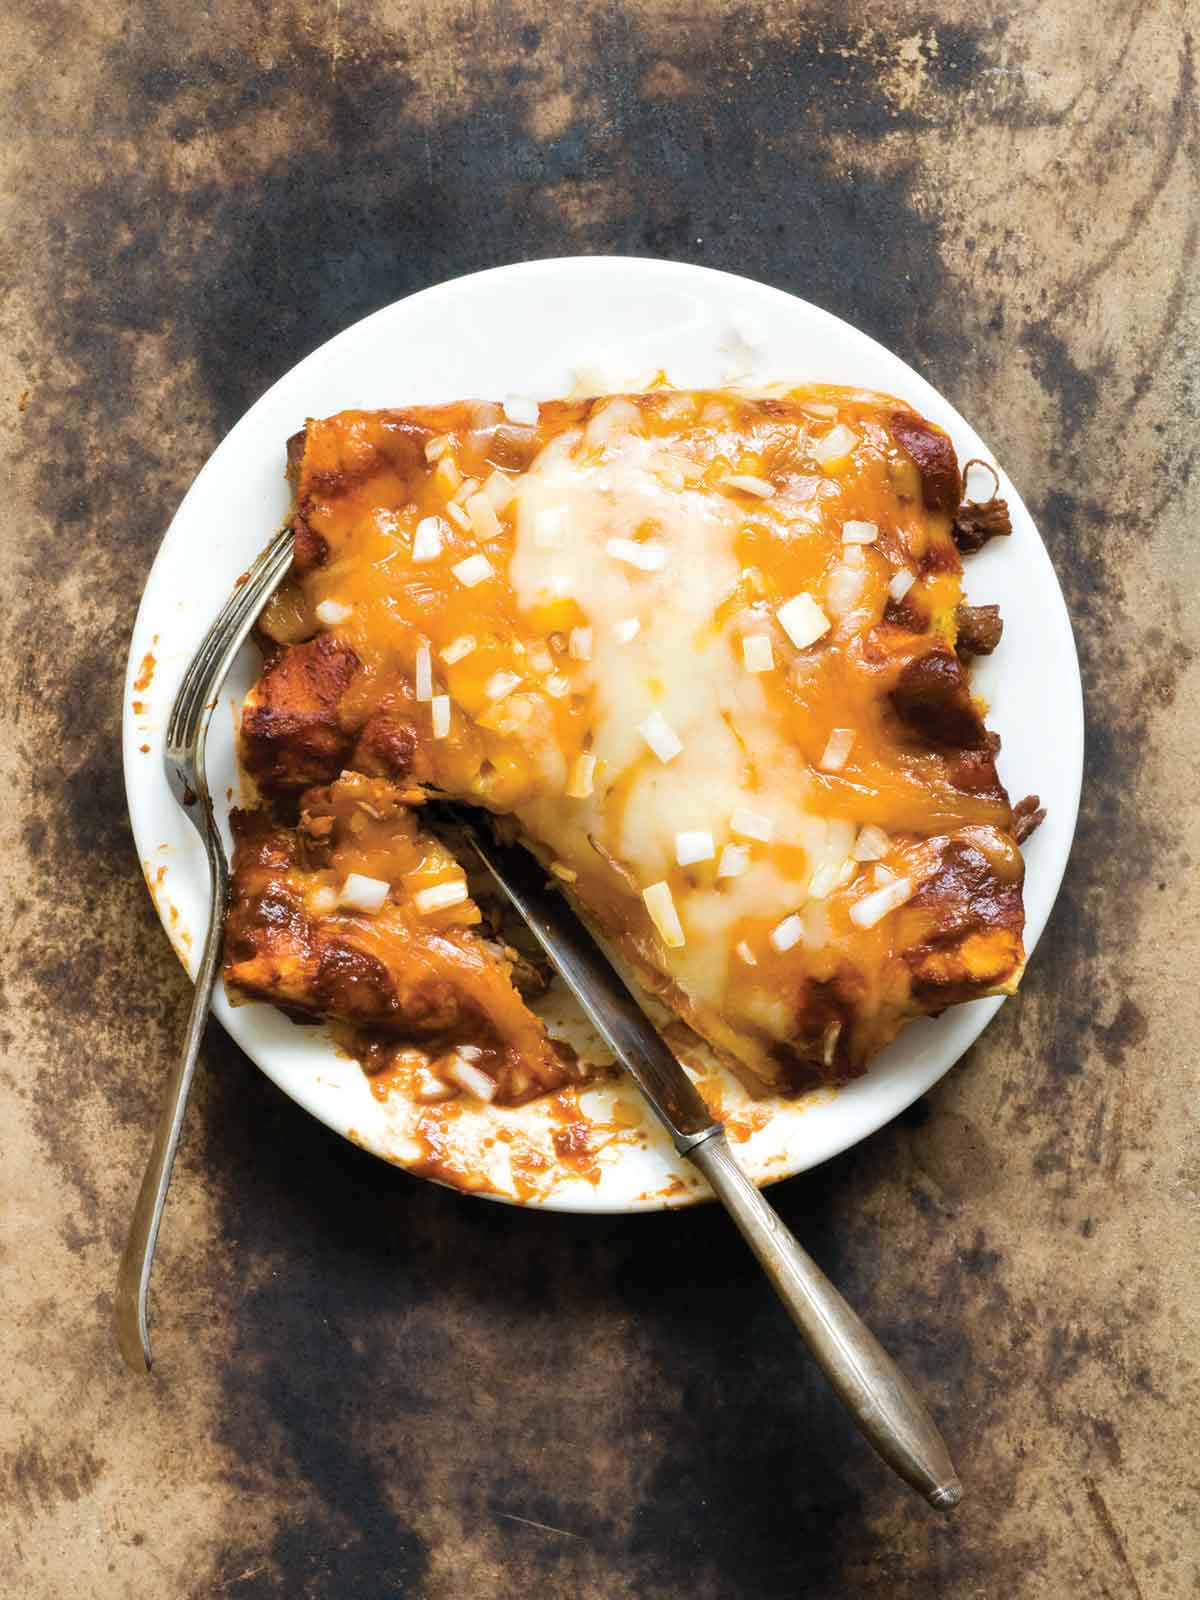 A white plate with 3 shredded beef enchiladas covered with melted cheese and diced onions, with a knife and fork.